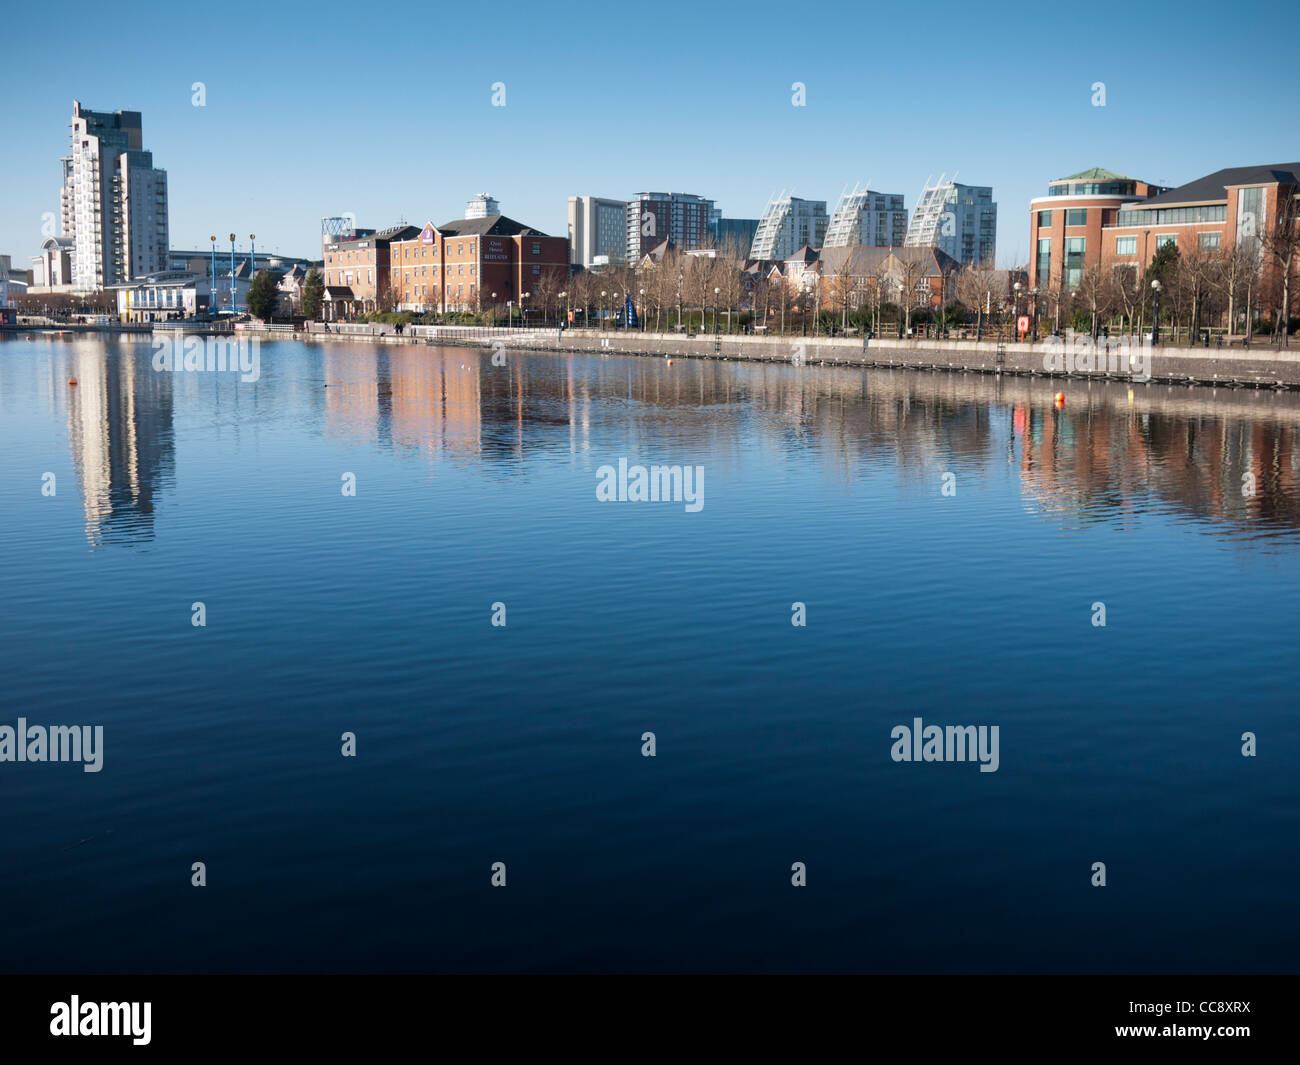 Salford Quays Manchester England UK. Views of the modern buildings over water on a clear sunny day Stock Photo